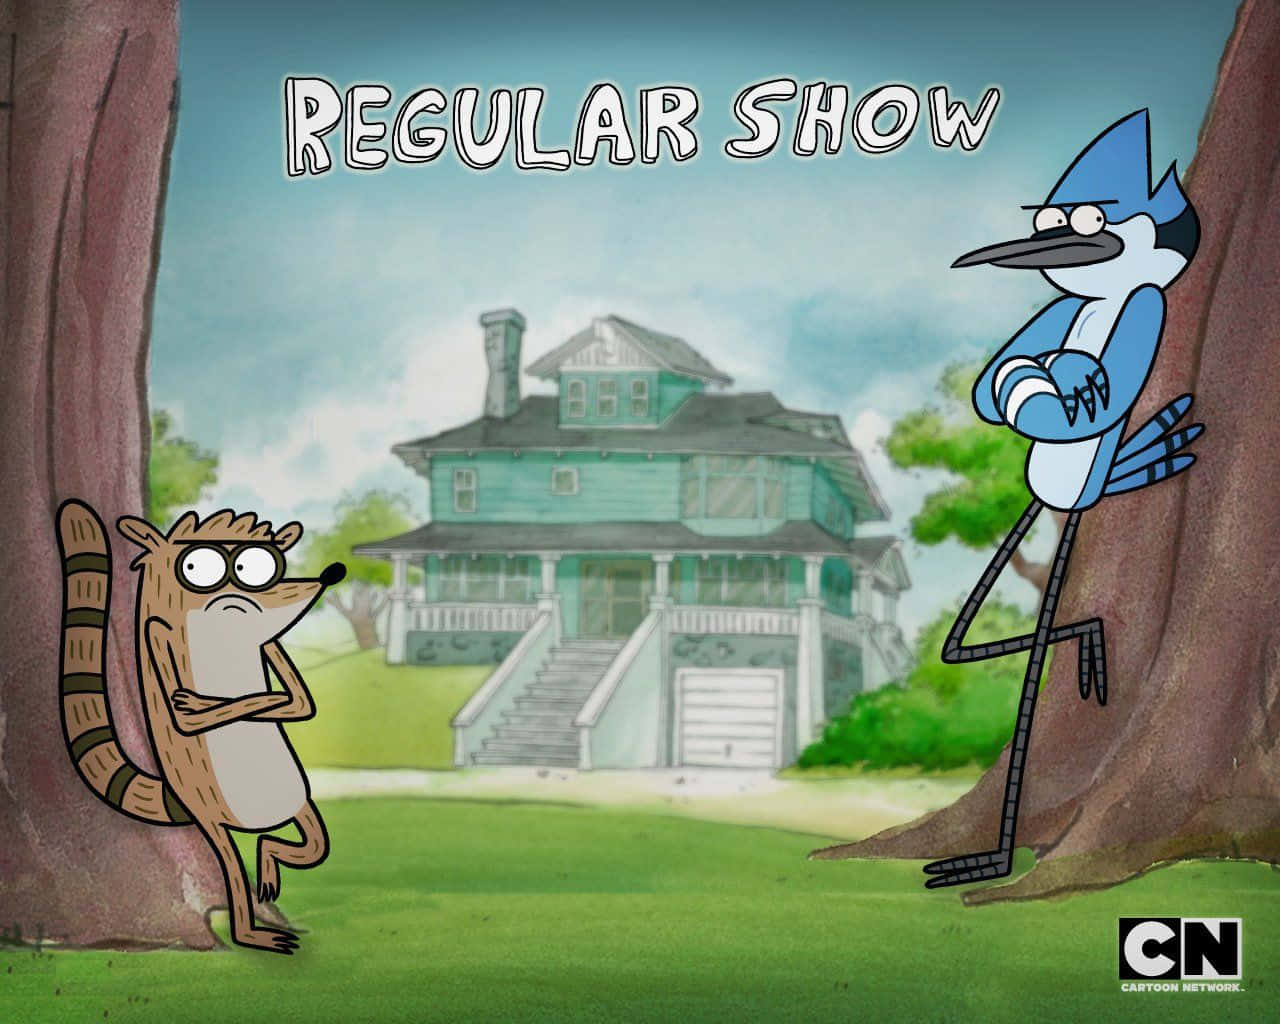 The Regular Show characters mesmerized by the night sky